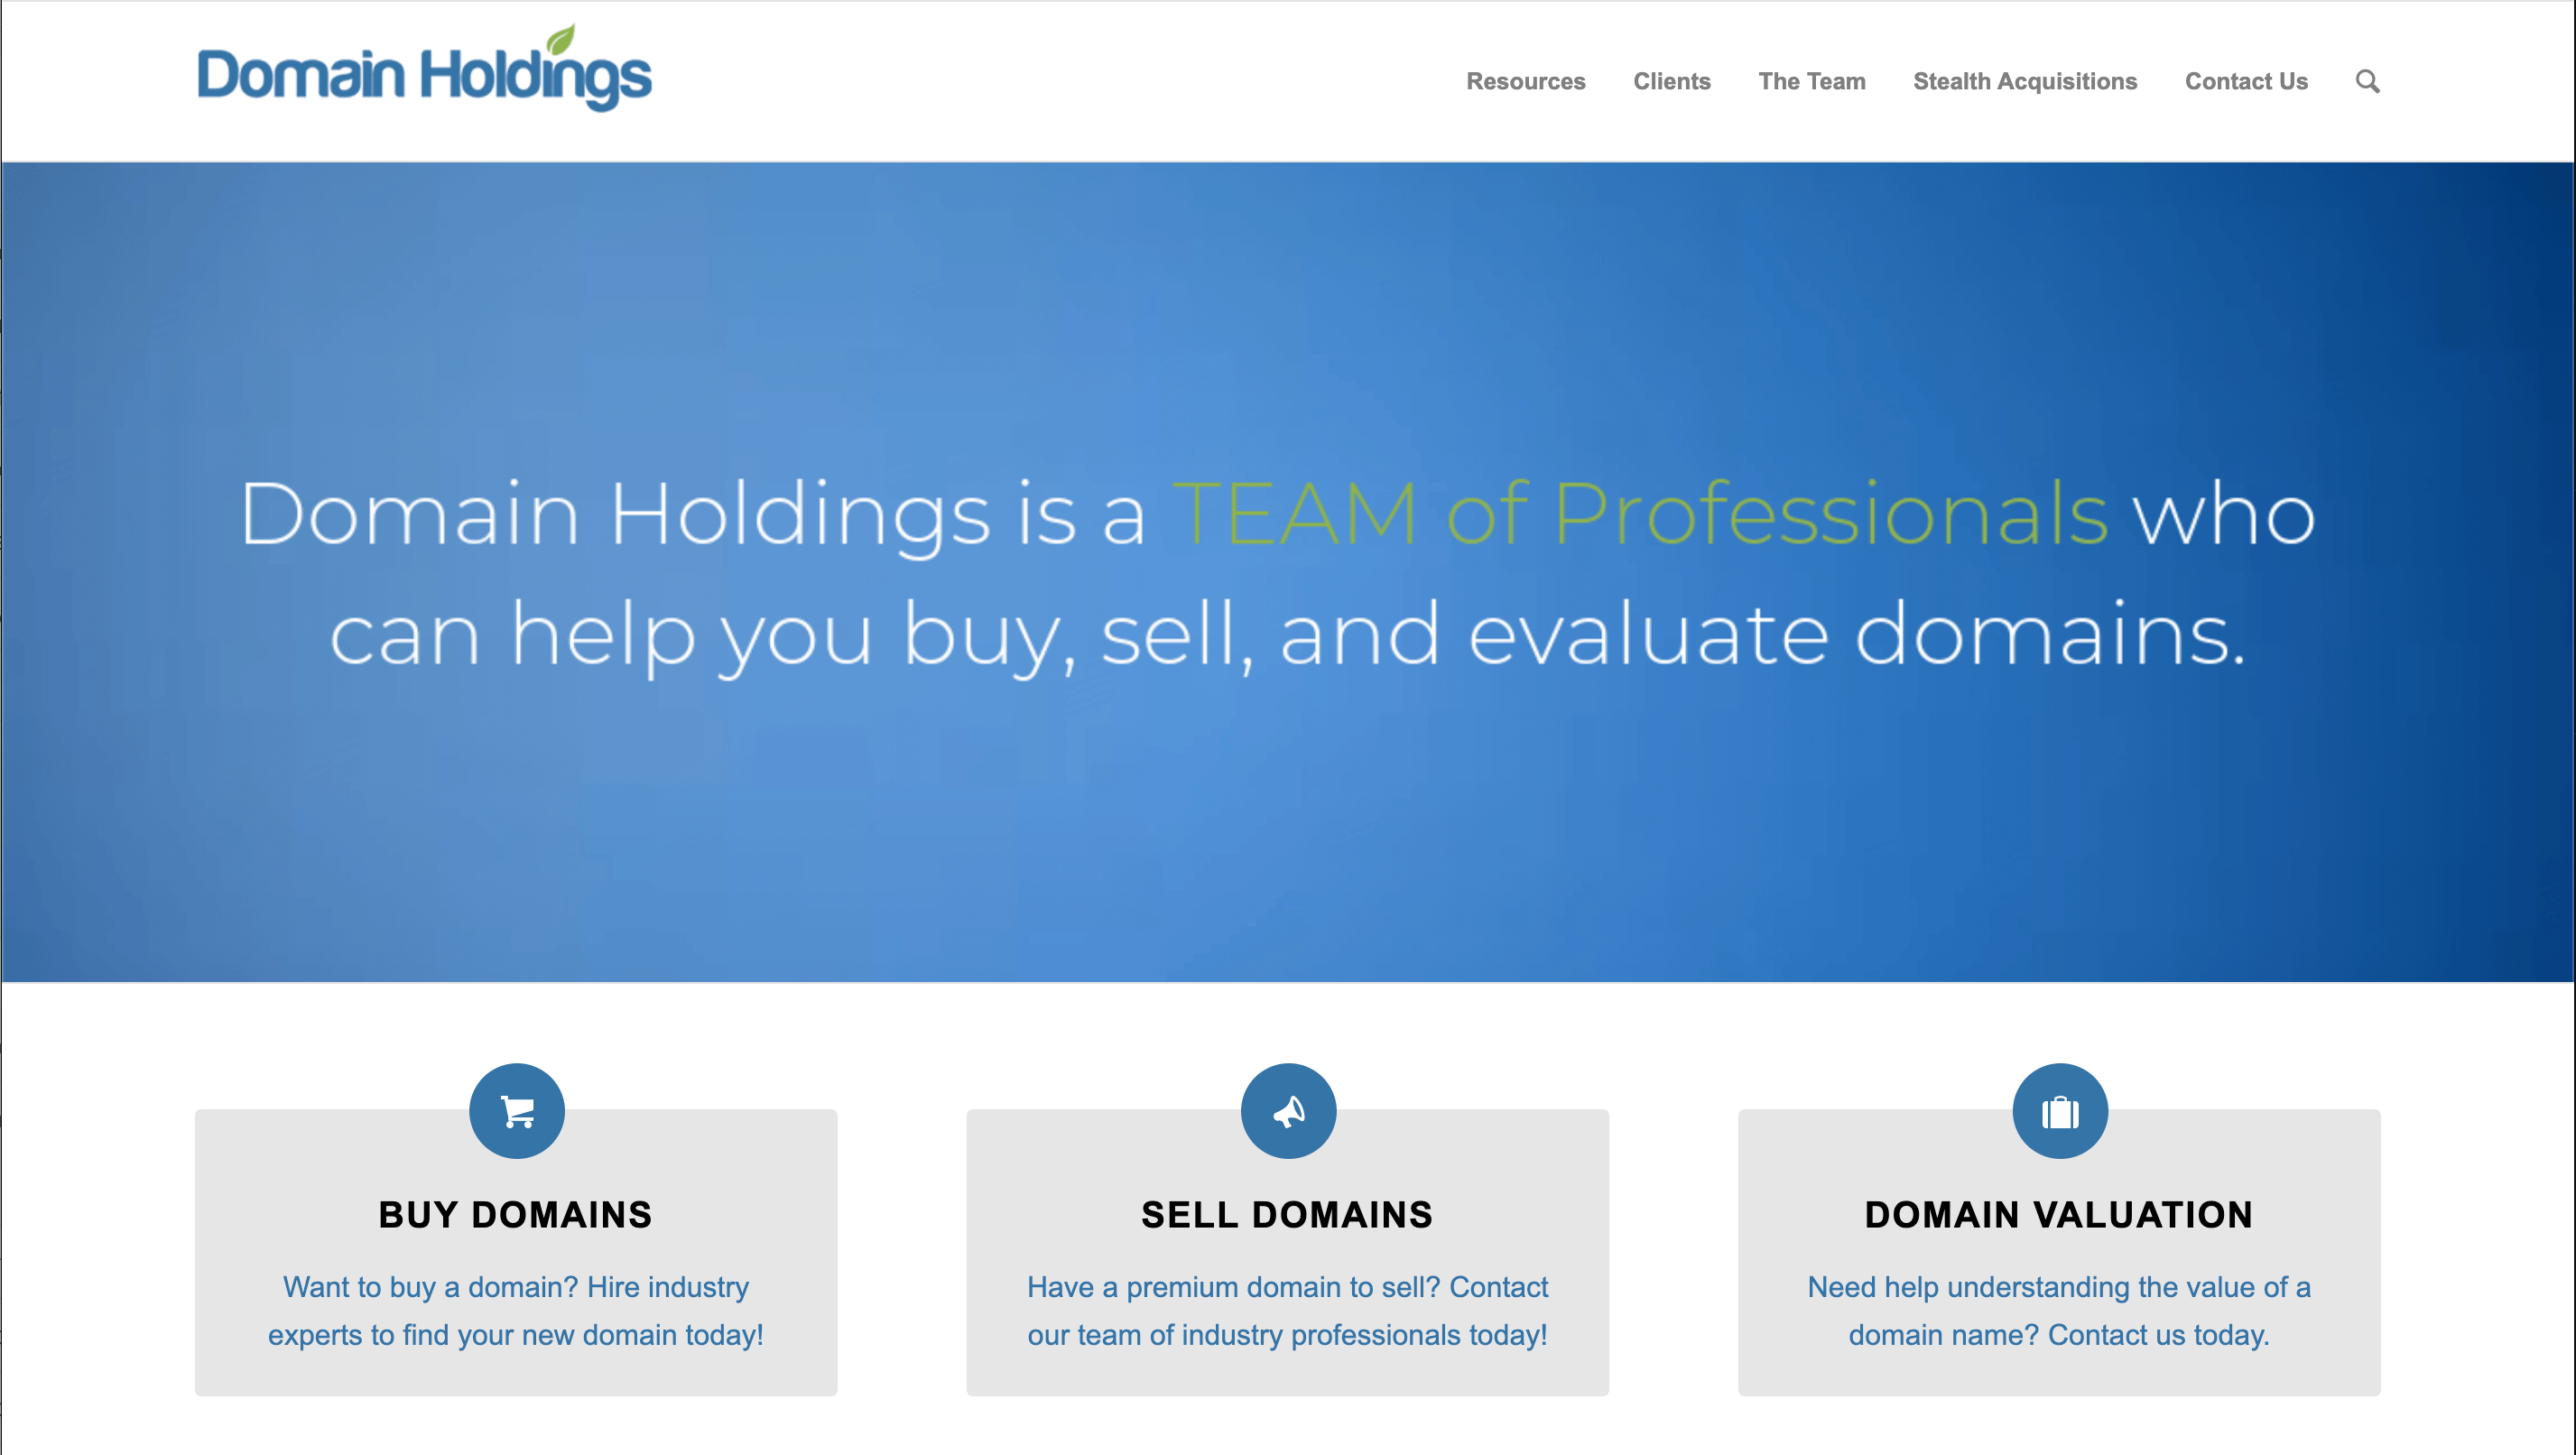 Domain Holdings' home page